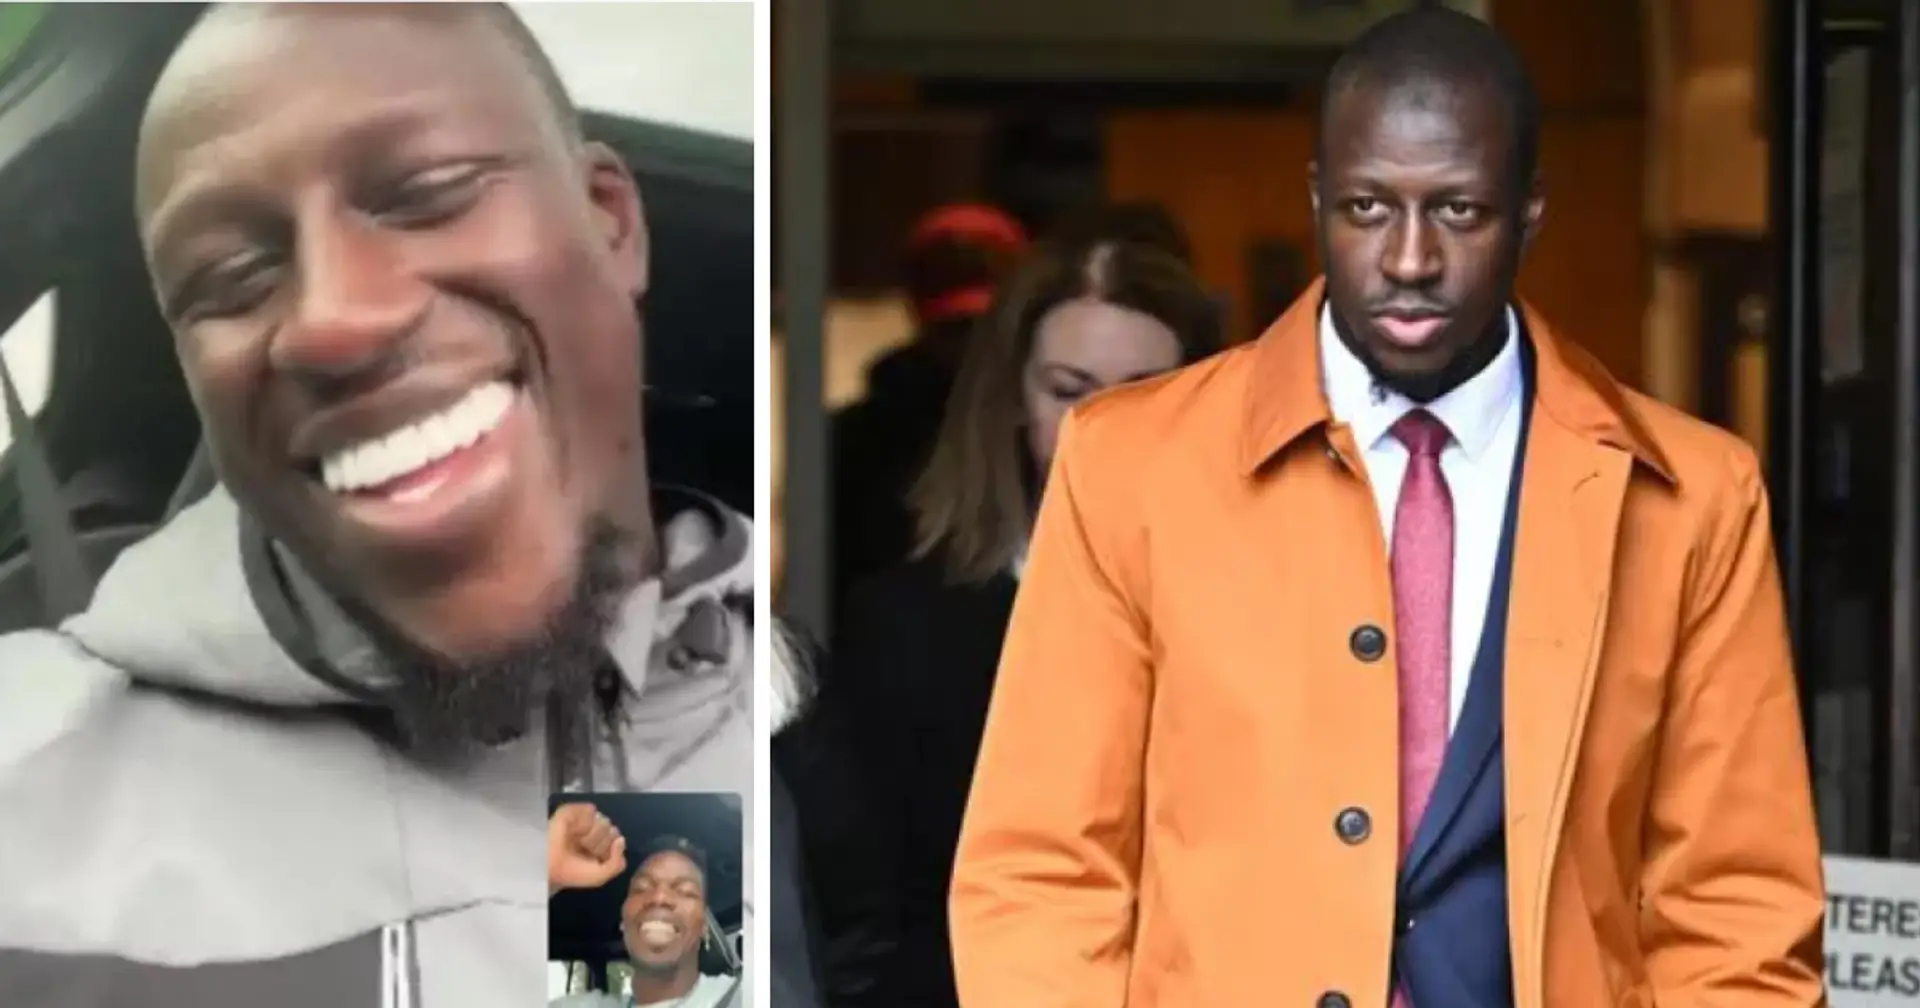 Paul Pogba shares a picture of happy Benjamin Mendy after he was cleared of rape charges